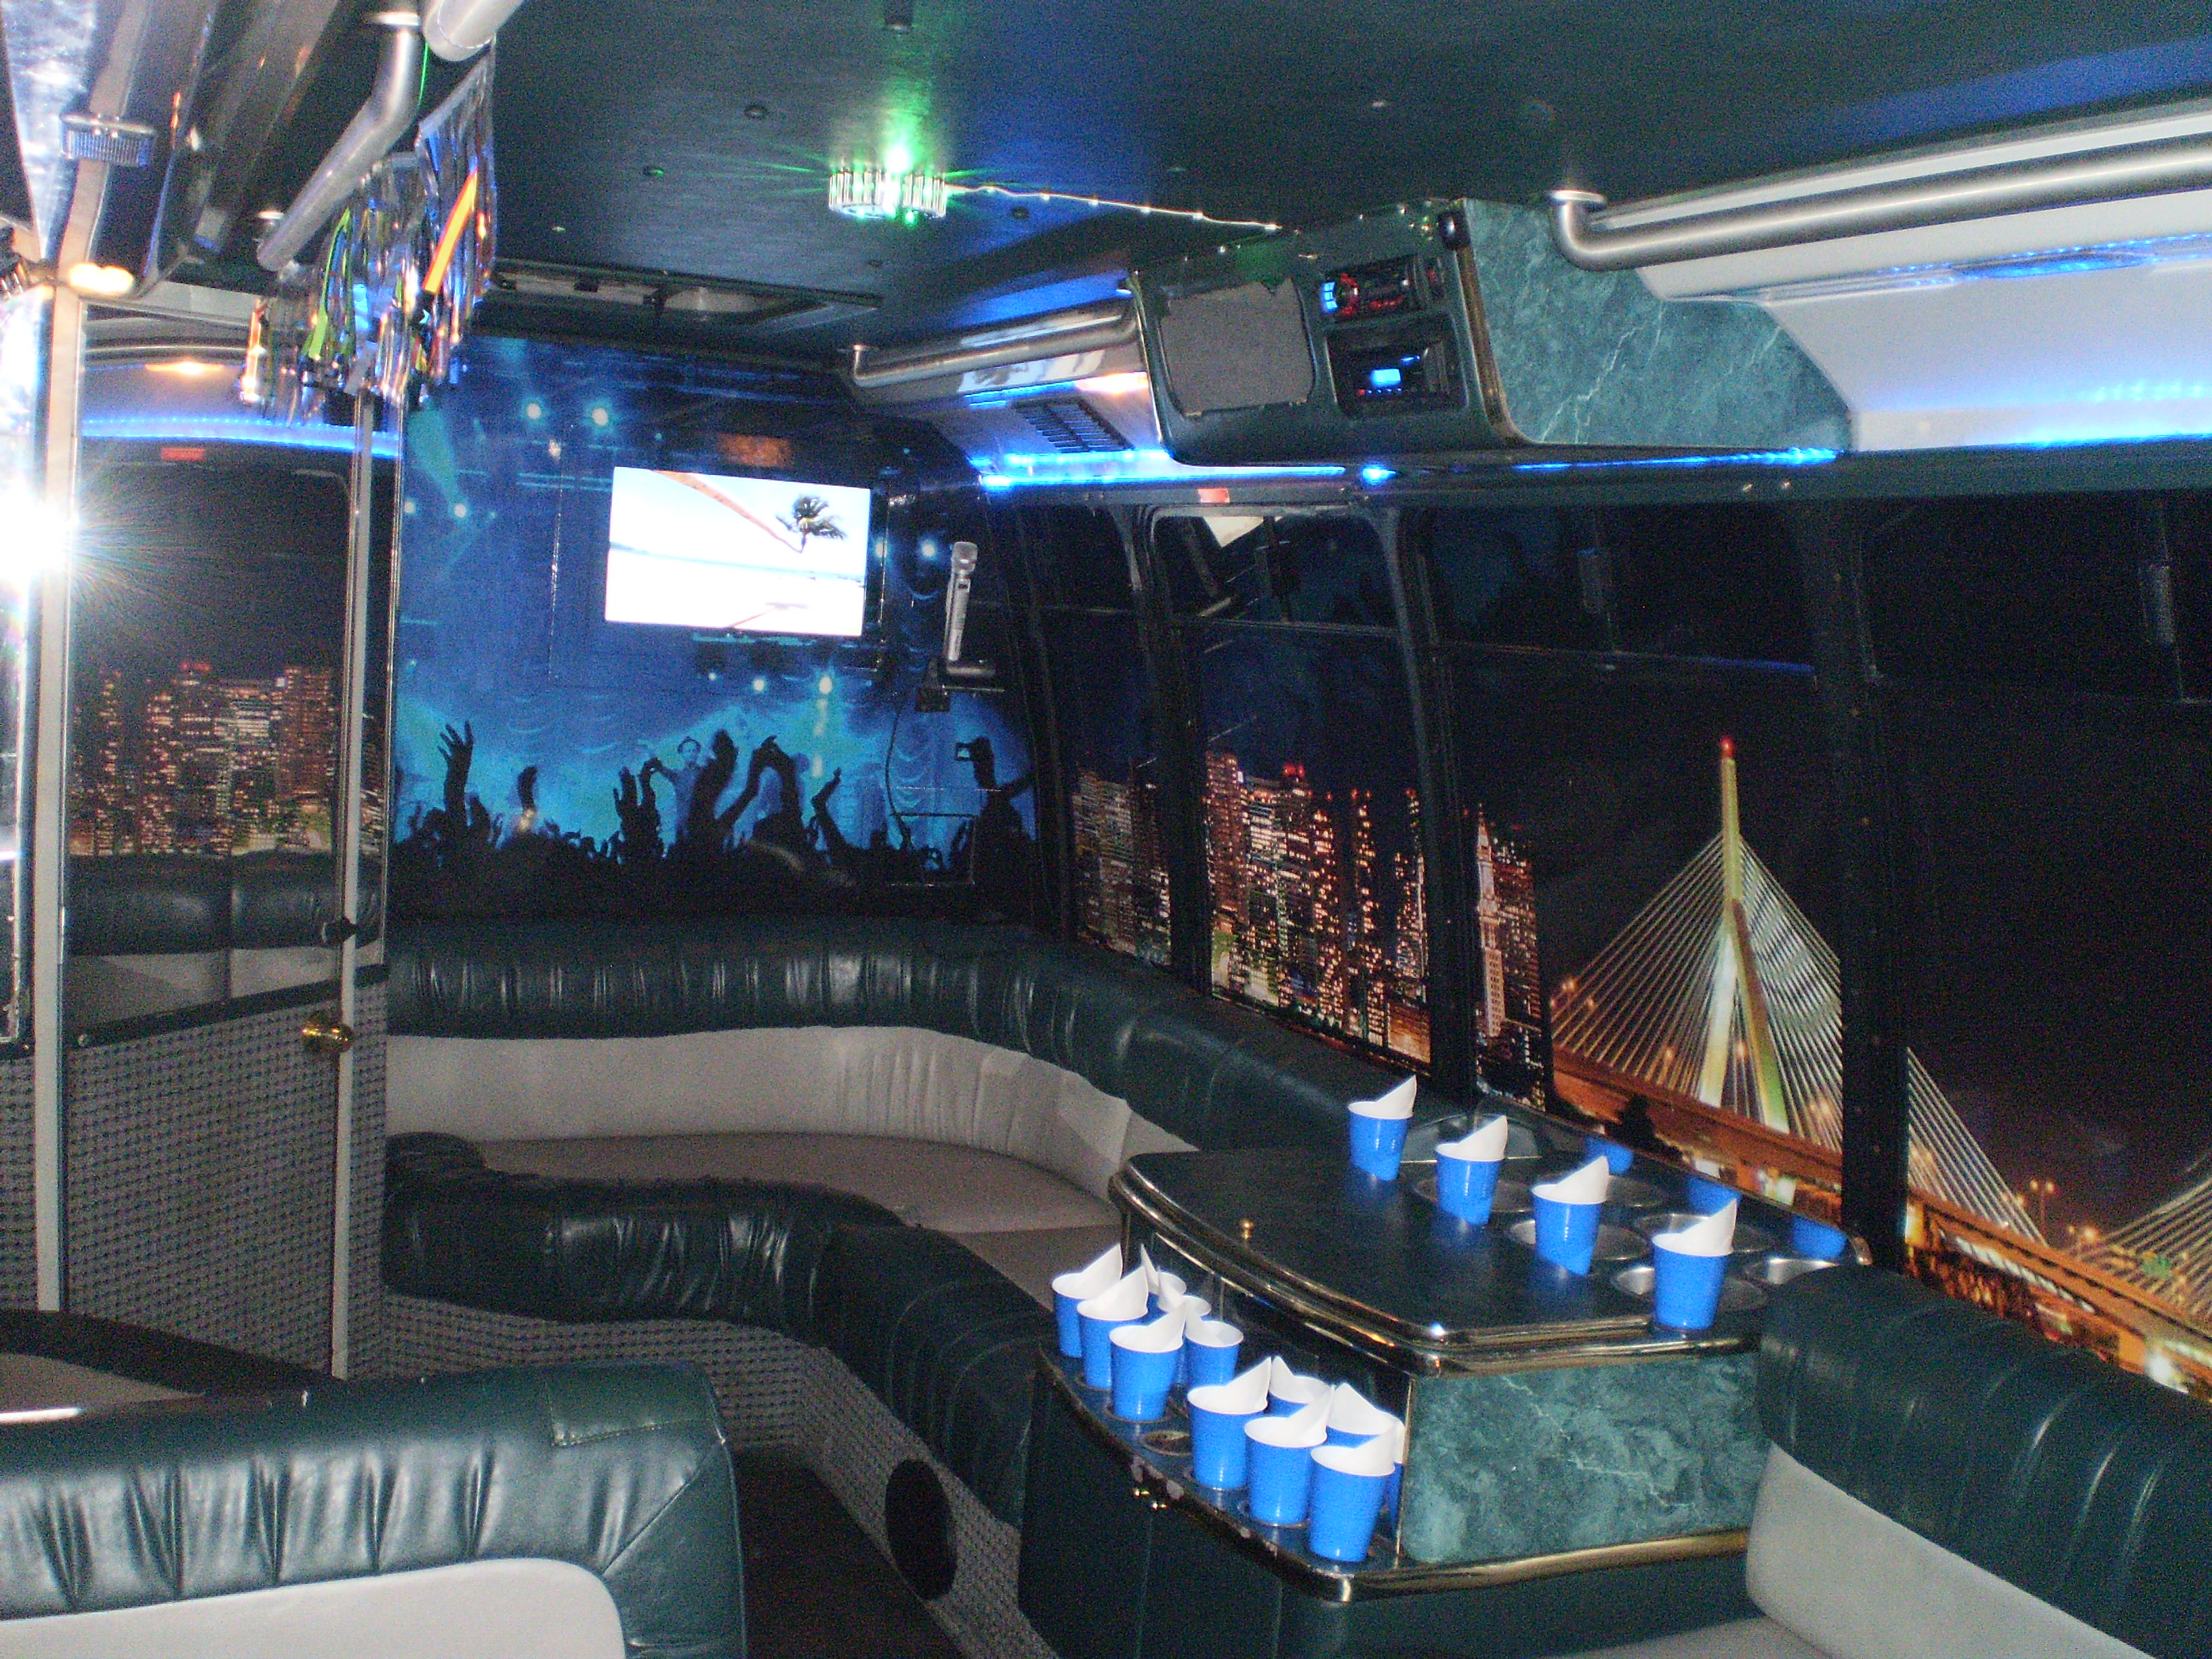 Passenger Party Bus - Inside View at Night